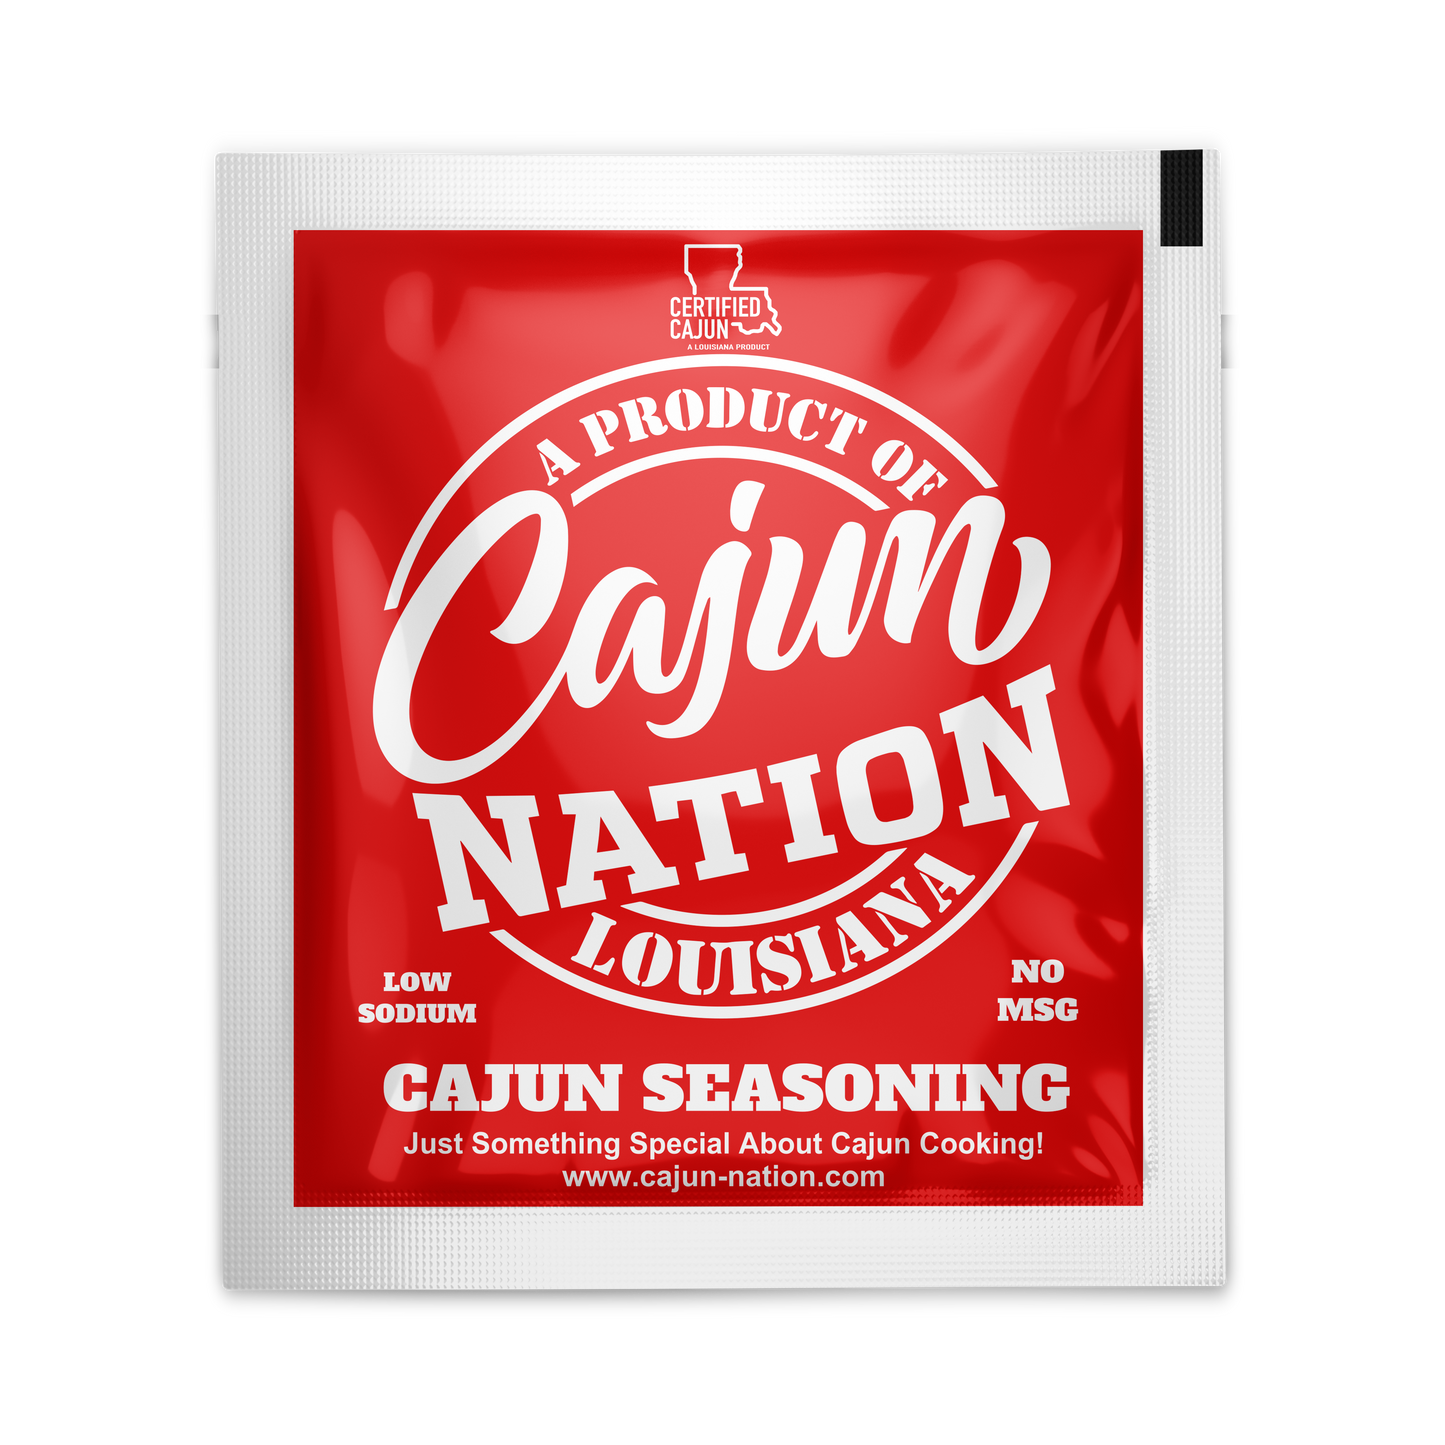 Cajun Nation Seasoning Packets are a Certified Cajun flavorful blend of Cajun Spices with No MSG and Gluten-Free.  Made in Cajun Nation, Louisiana along the Cajun Coast. 